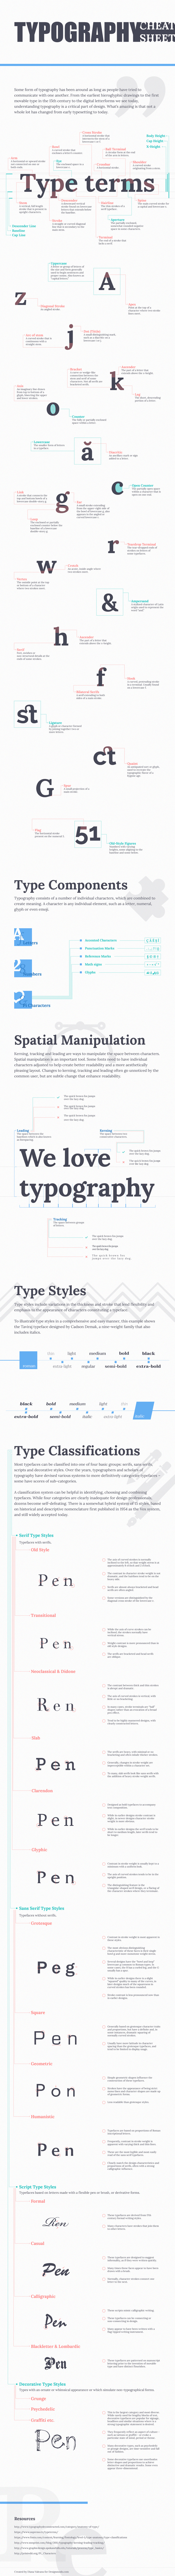 Typography Cheat Sheet [Infographic]